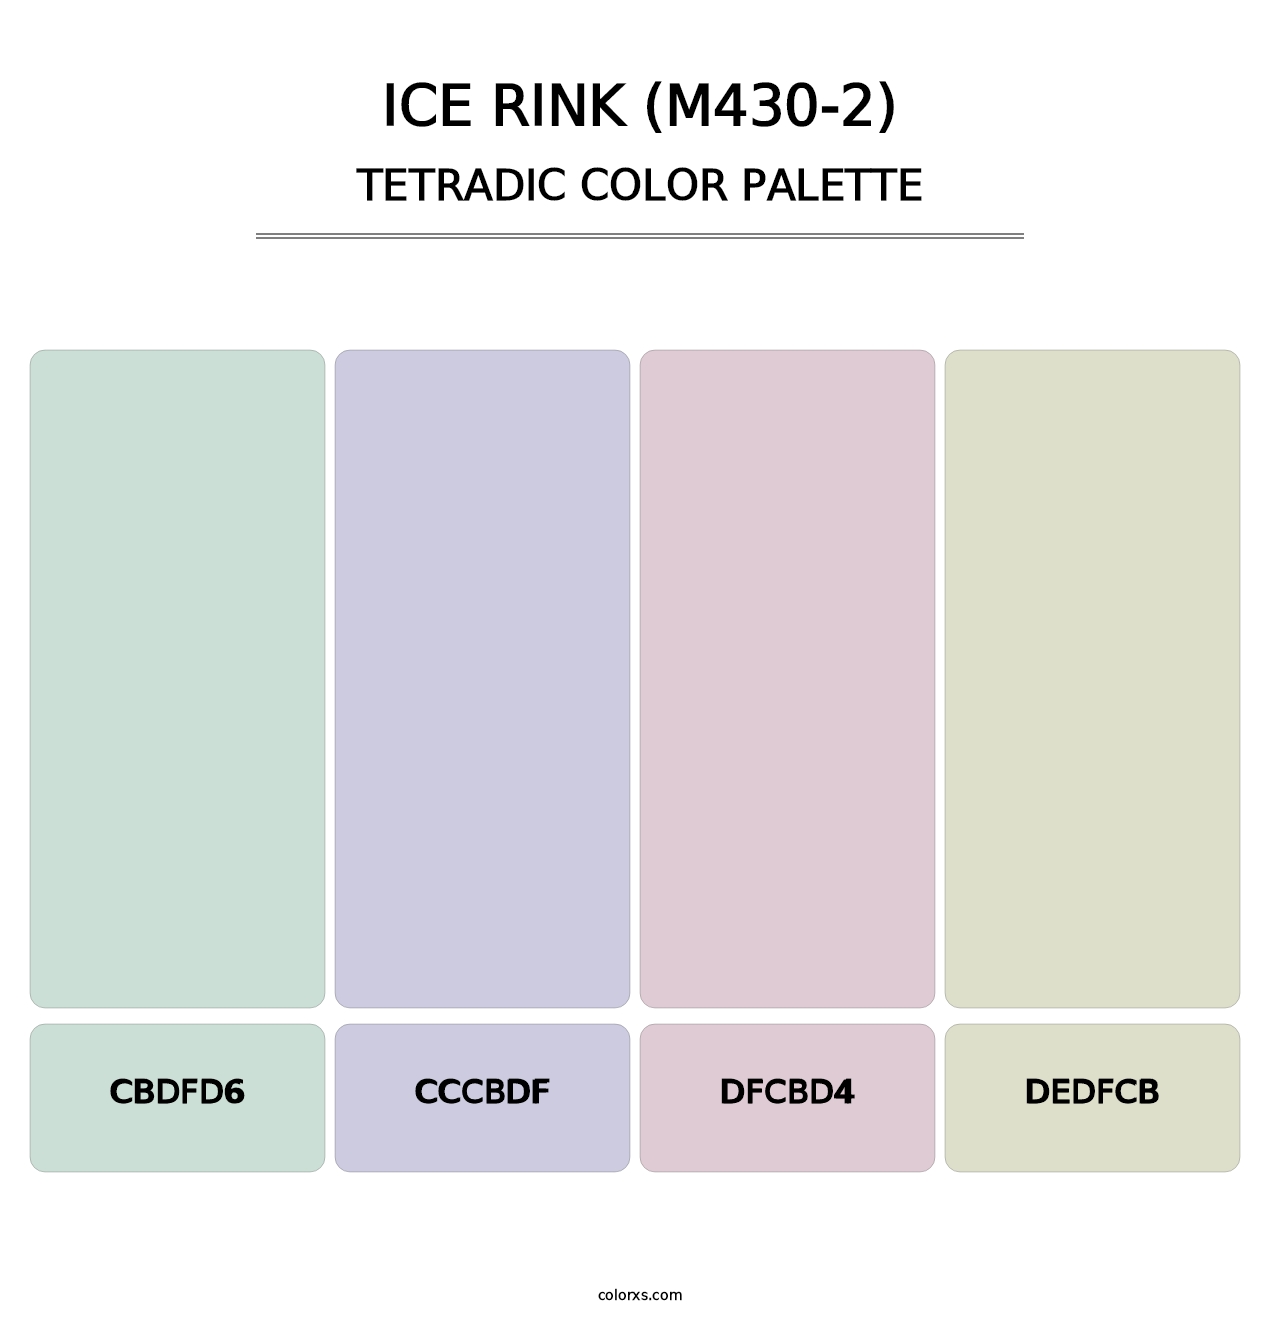 Ice Rink (M430-2) - Tetradic Color Palette